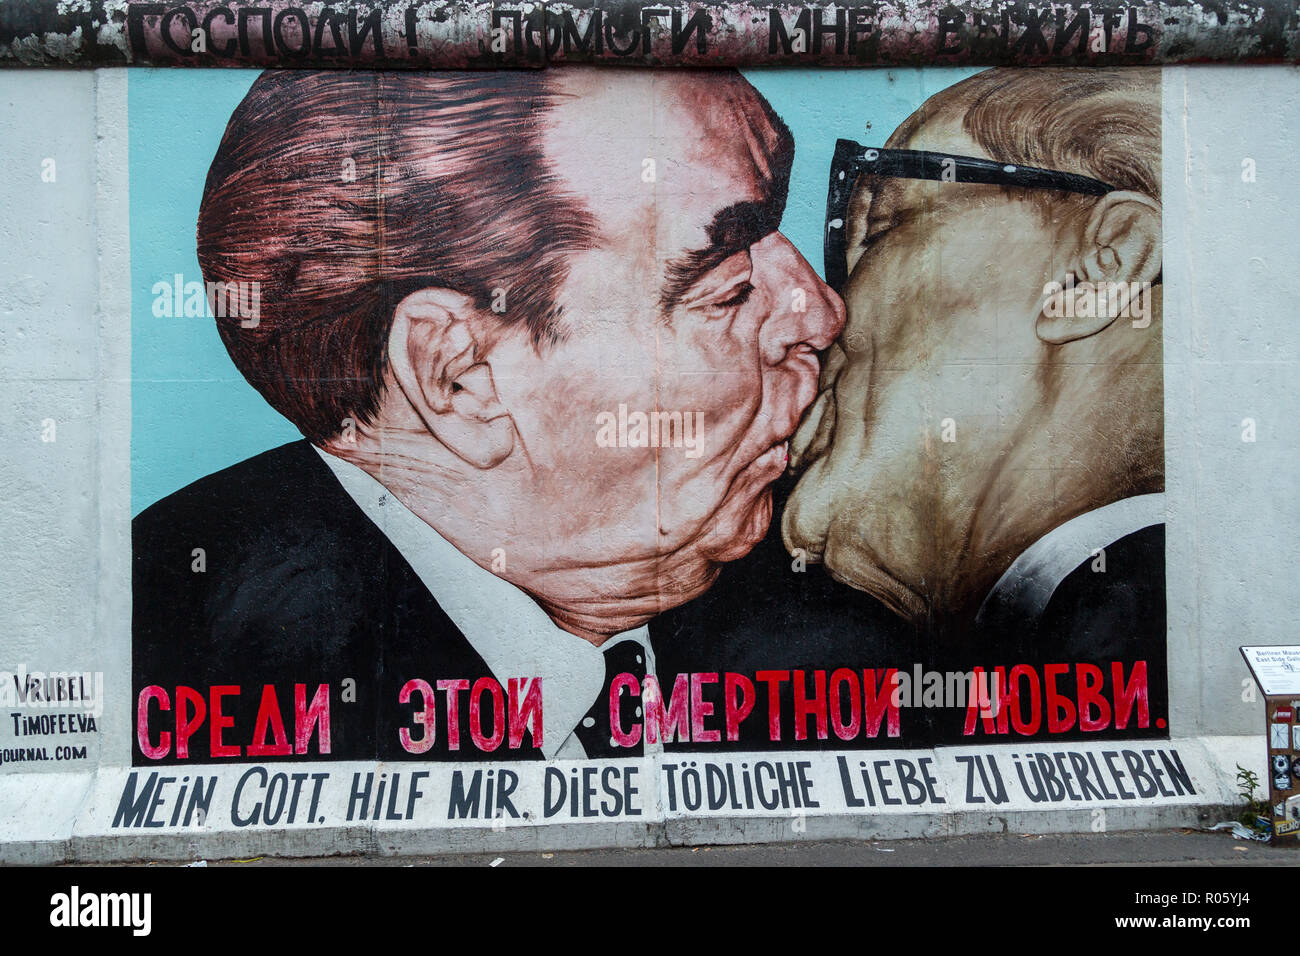 Monument East Side Gallery, Dimitrij Vrubel, brother kiss between Leonid Brezhnev and Erich Honecker, Berlin, Germany Stock Photo